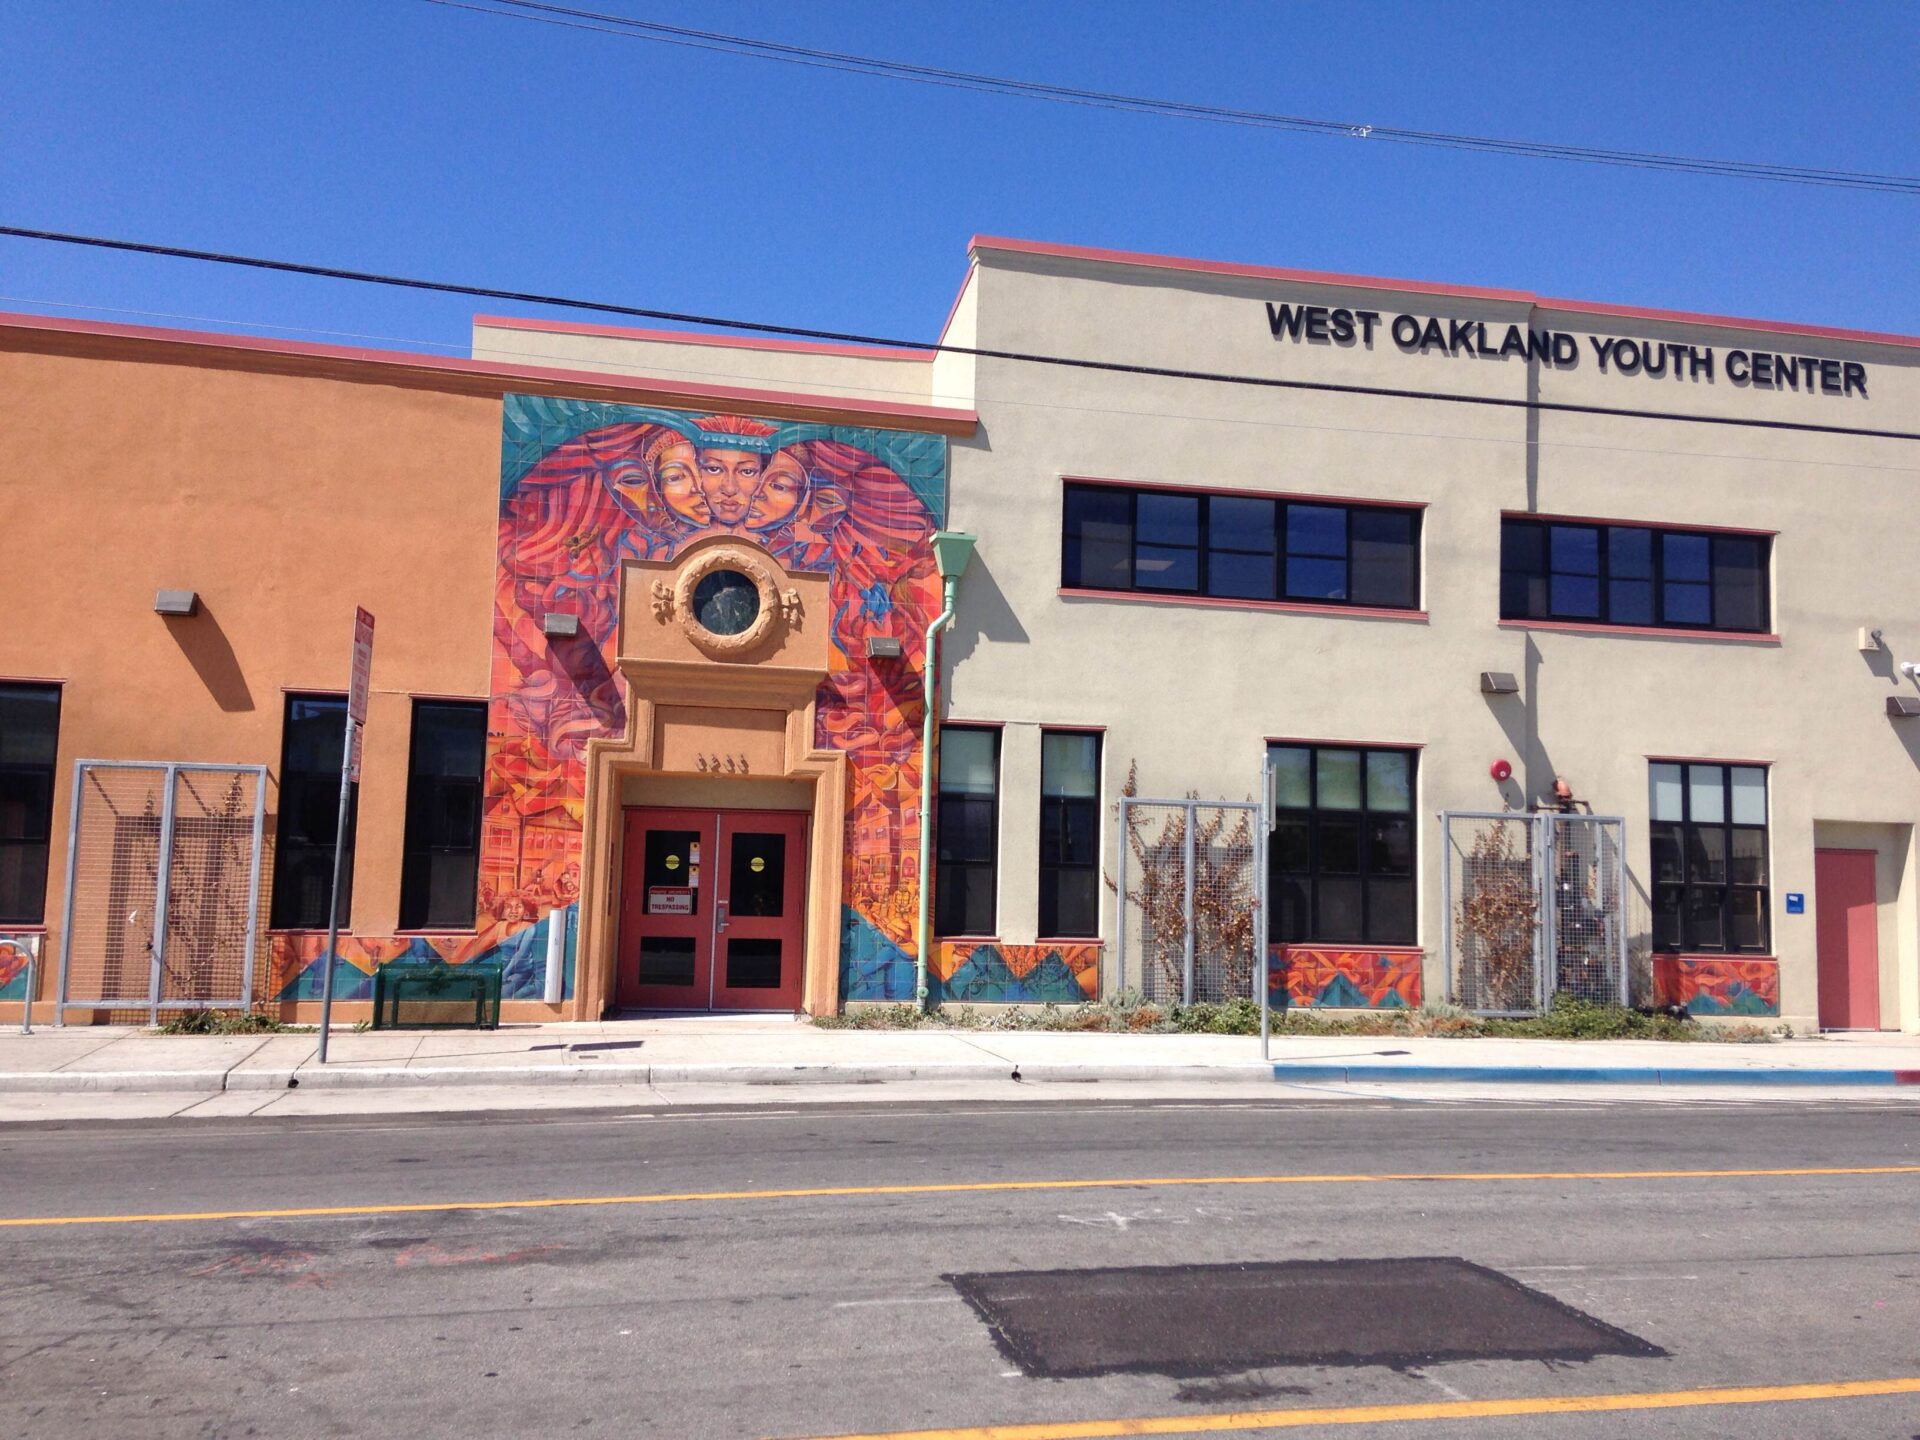 The West Oakland Youth Center - Tile Mural Creative Arts